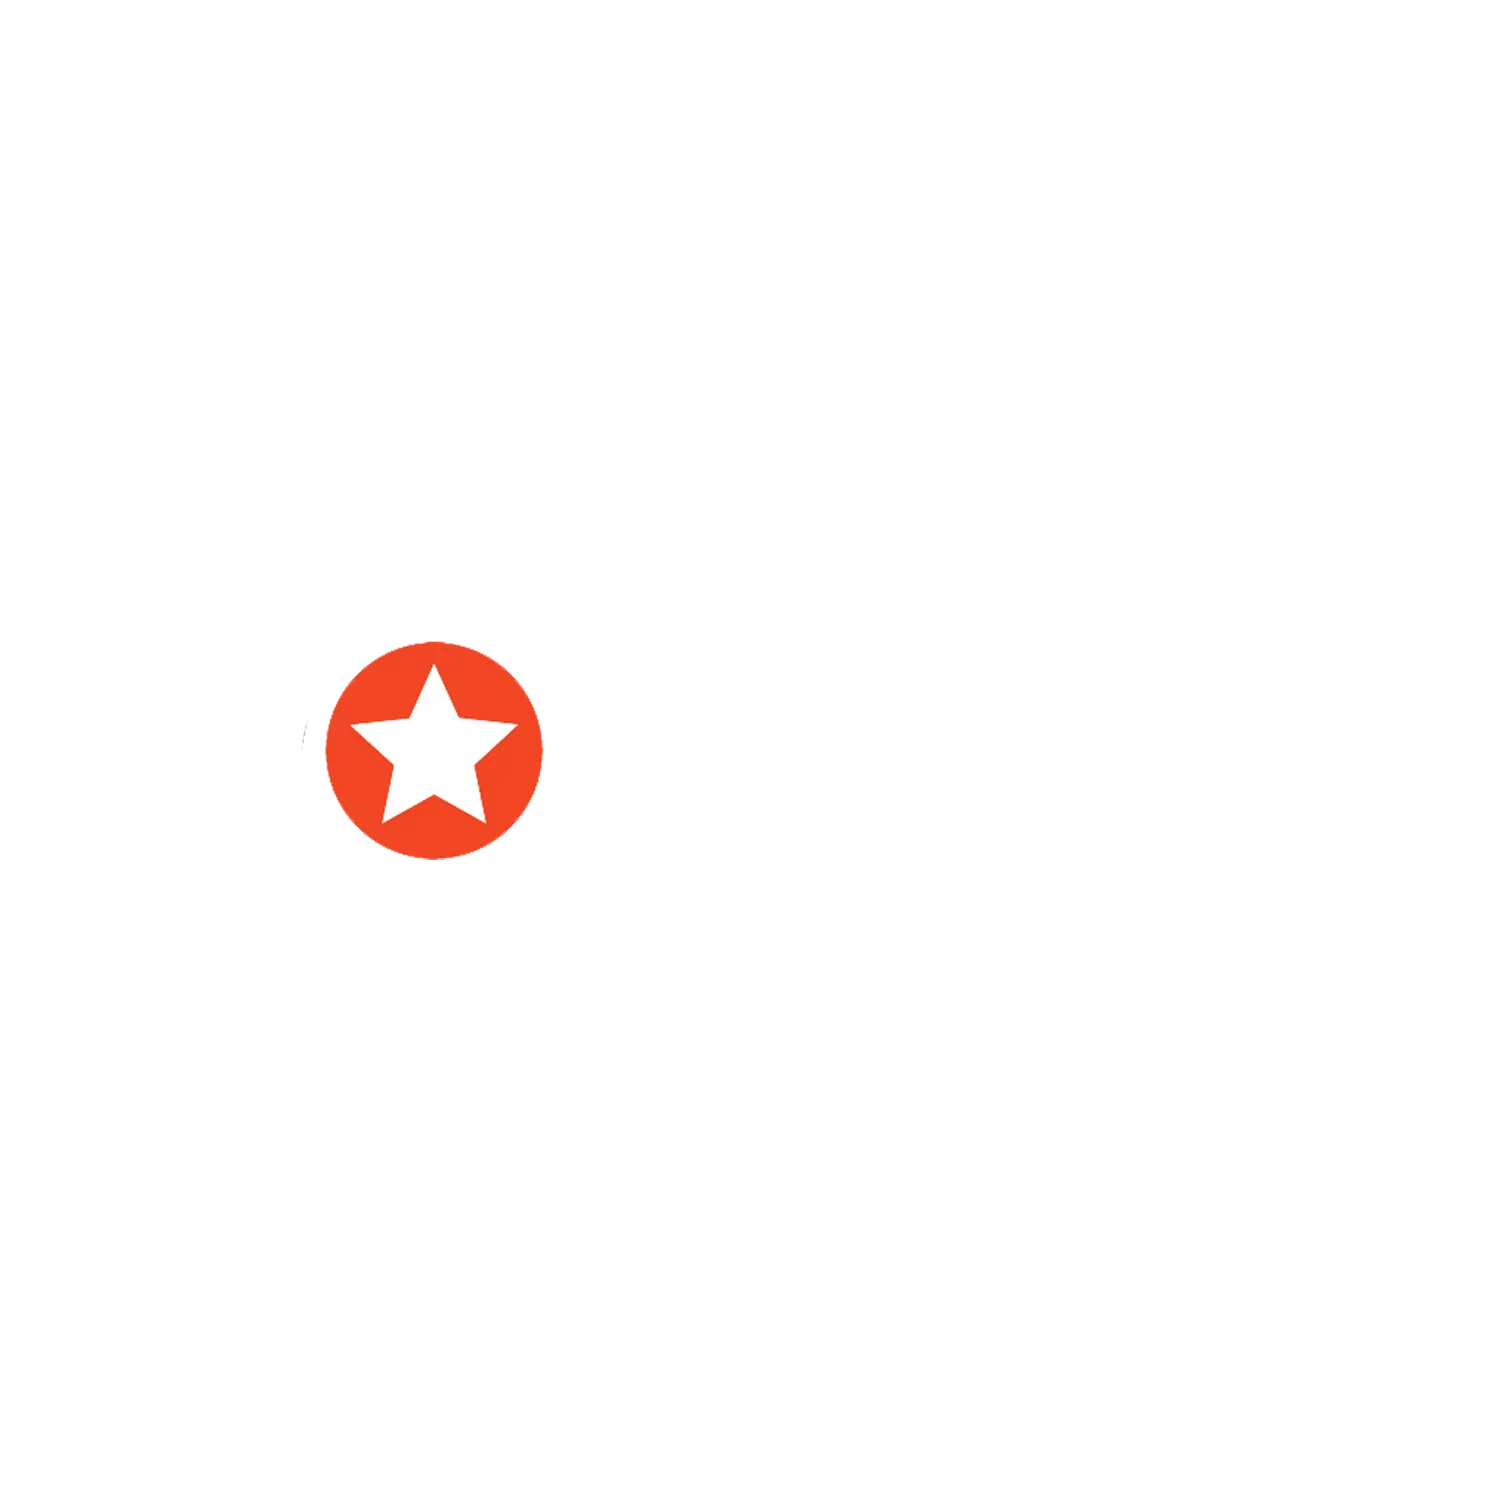 Learn about how to sign up and play games in the Mostbet Casino.